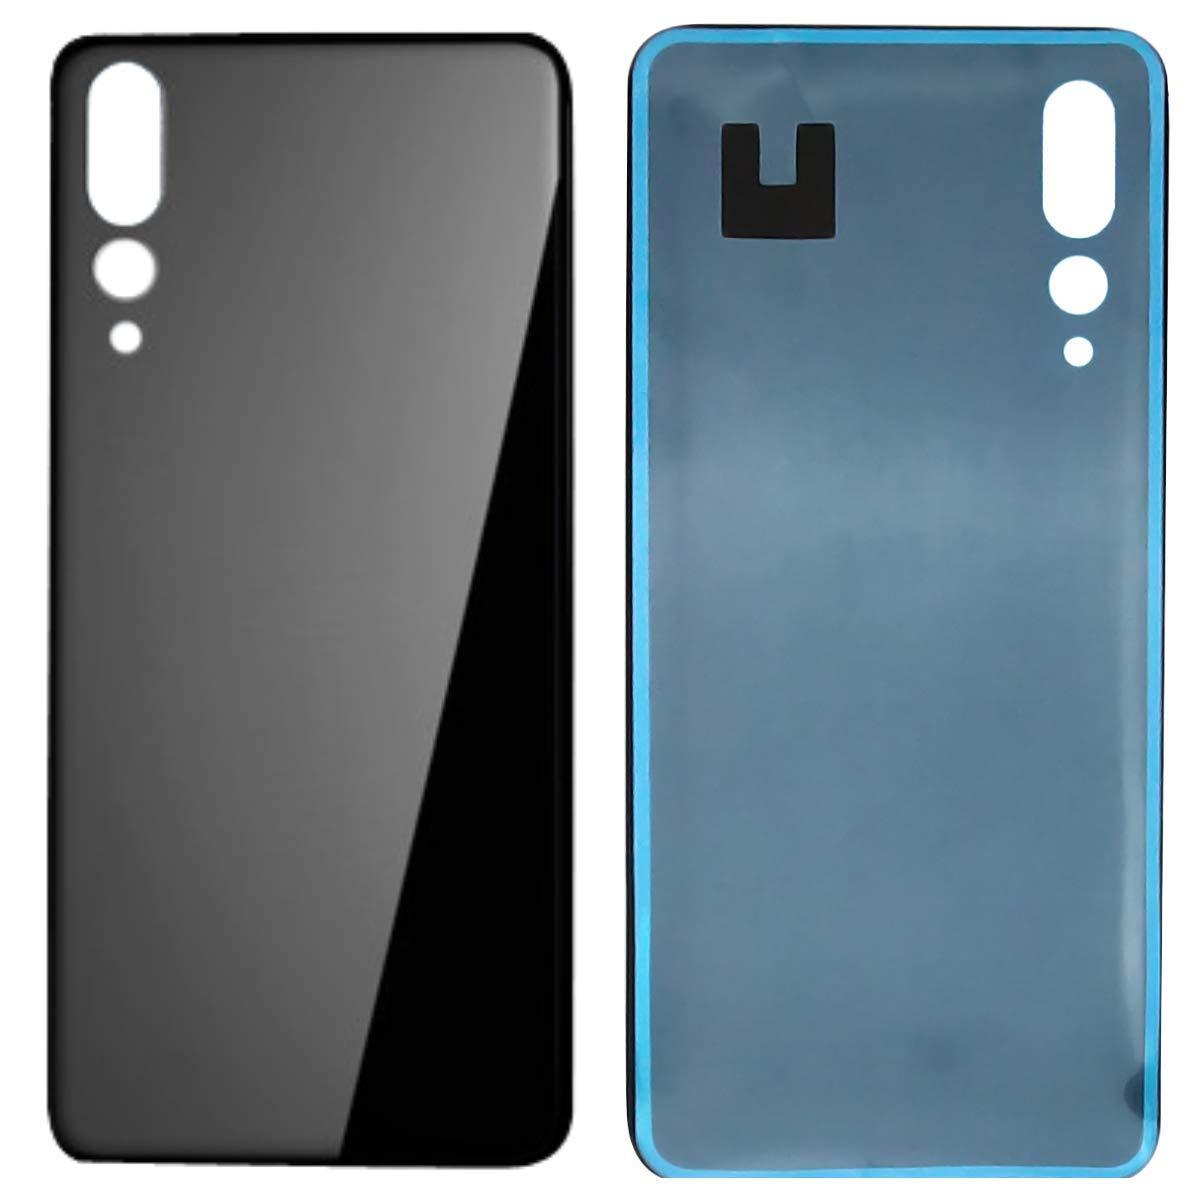 Back Glass for Huawei P20 Pro Black